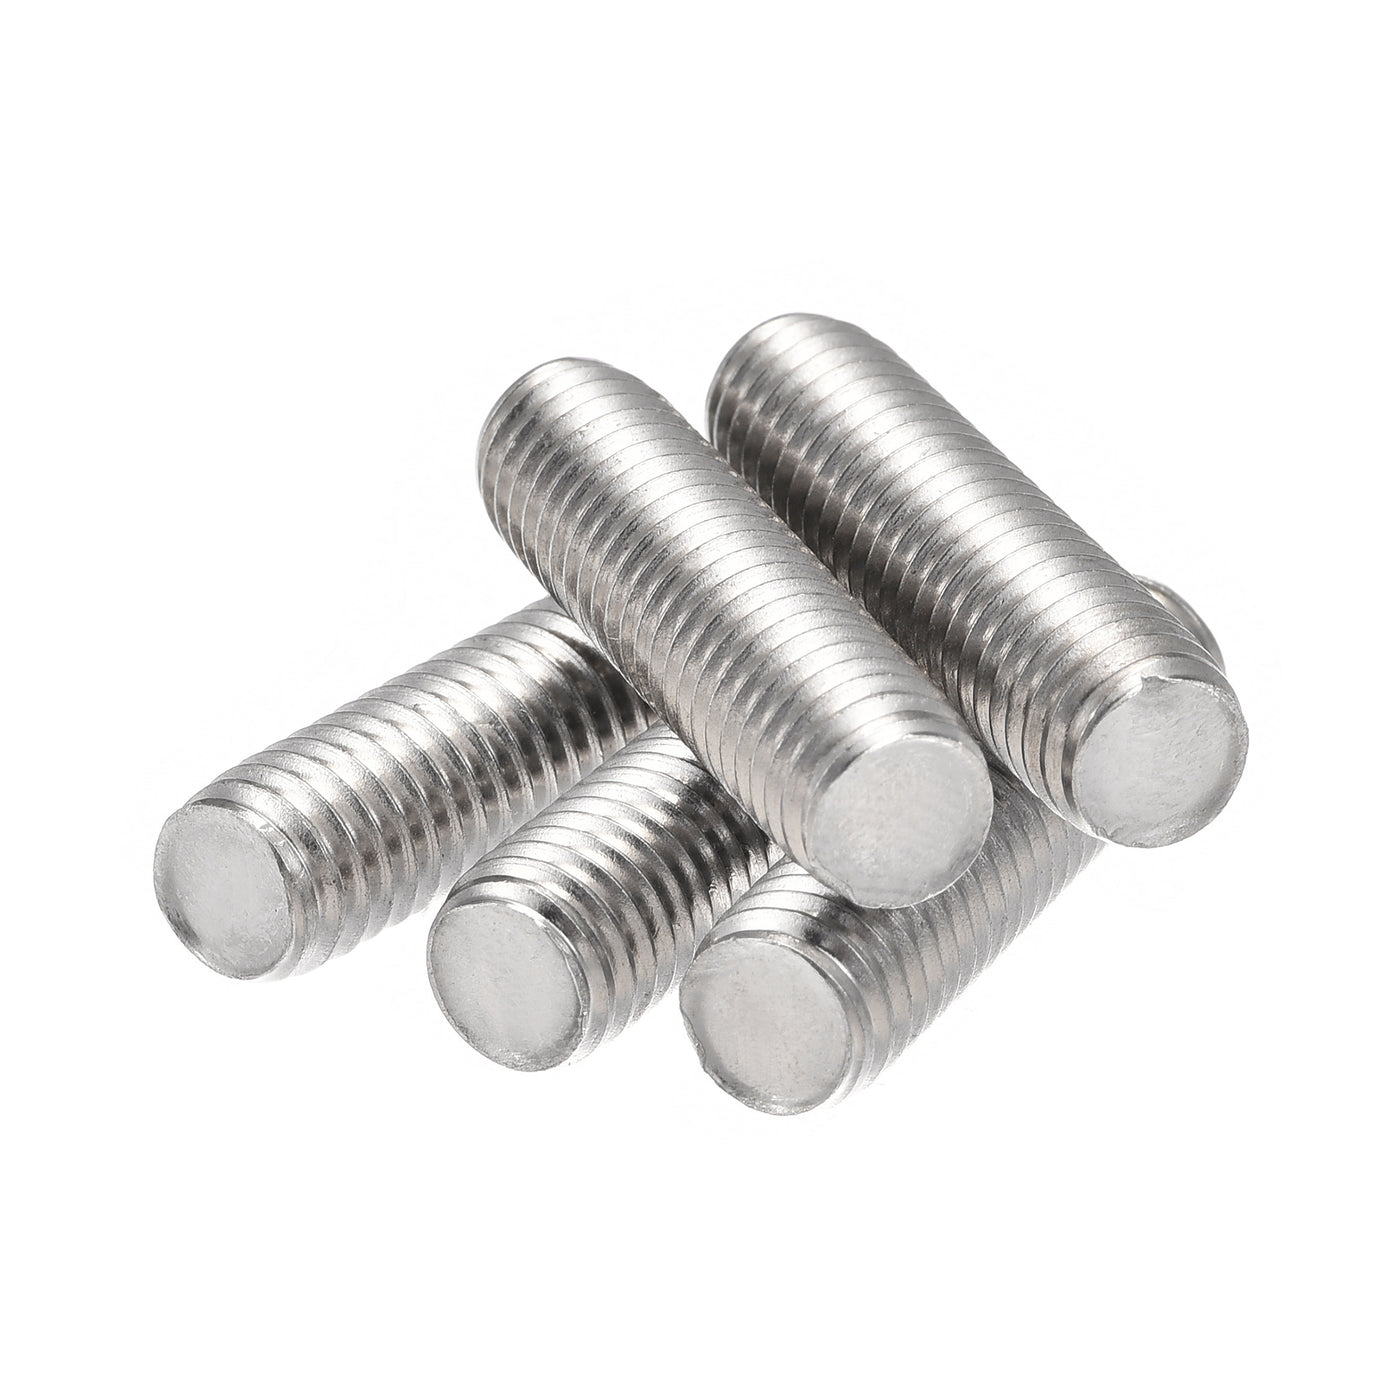 uxcell Uxcell 10pcs M8 x 30mm Fully Threaded Rod 304 Stainless Steel Right Hand Threads